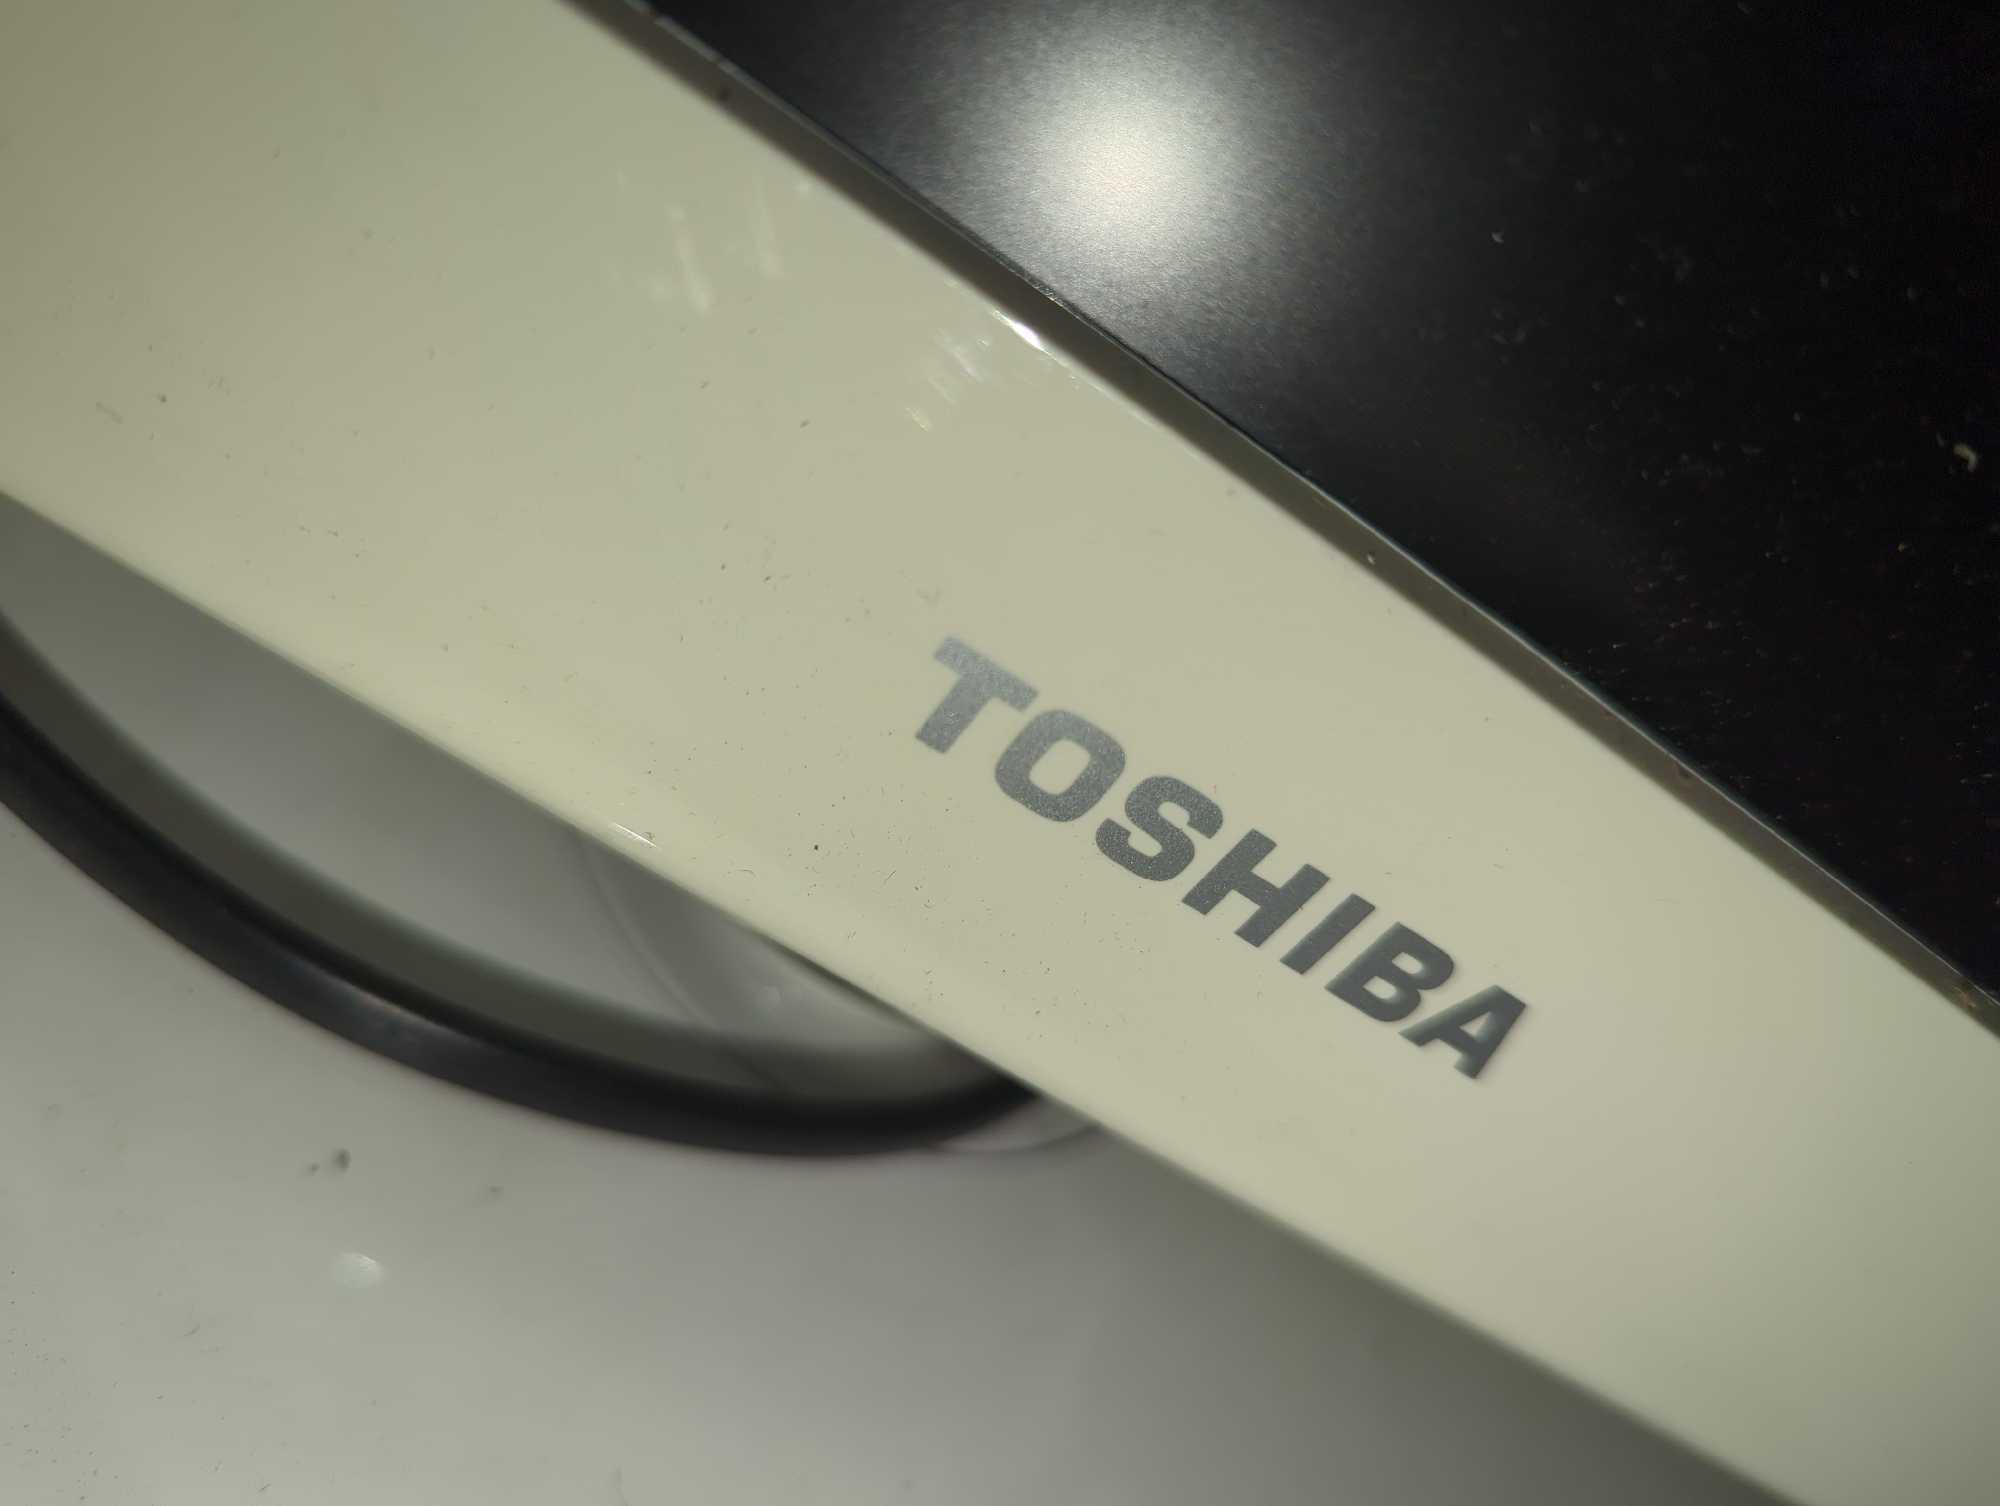 Toshiba 24" Integrated High Definition LED TV/DVD Combination, Model 24V4260U, No Remote, Comes with